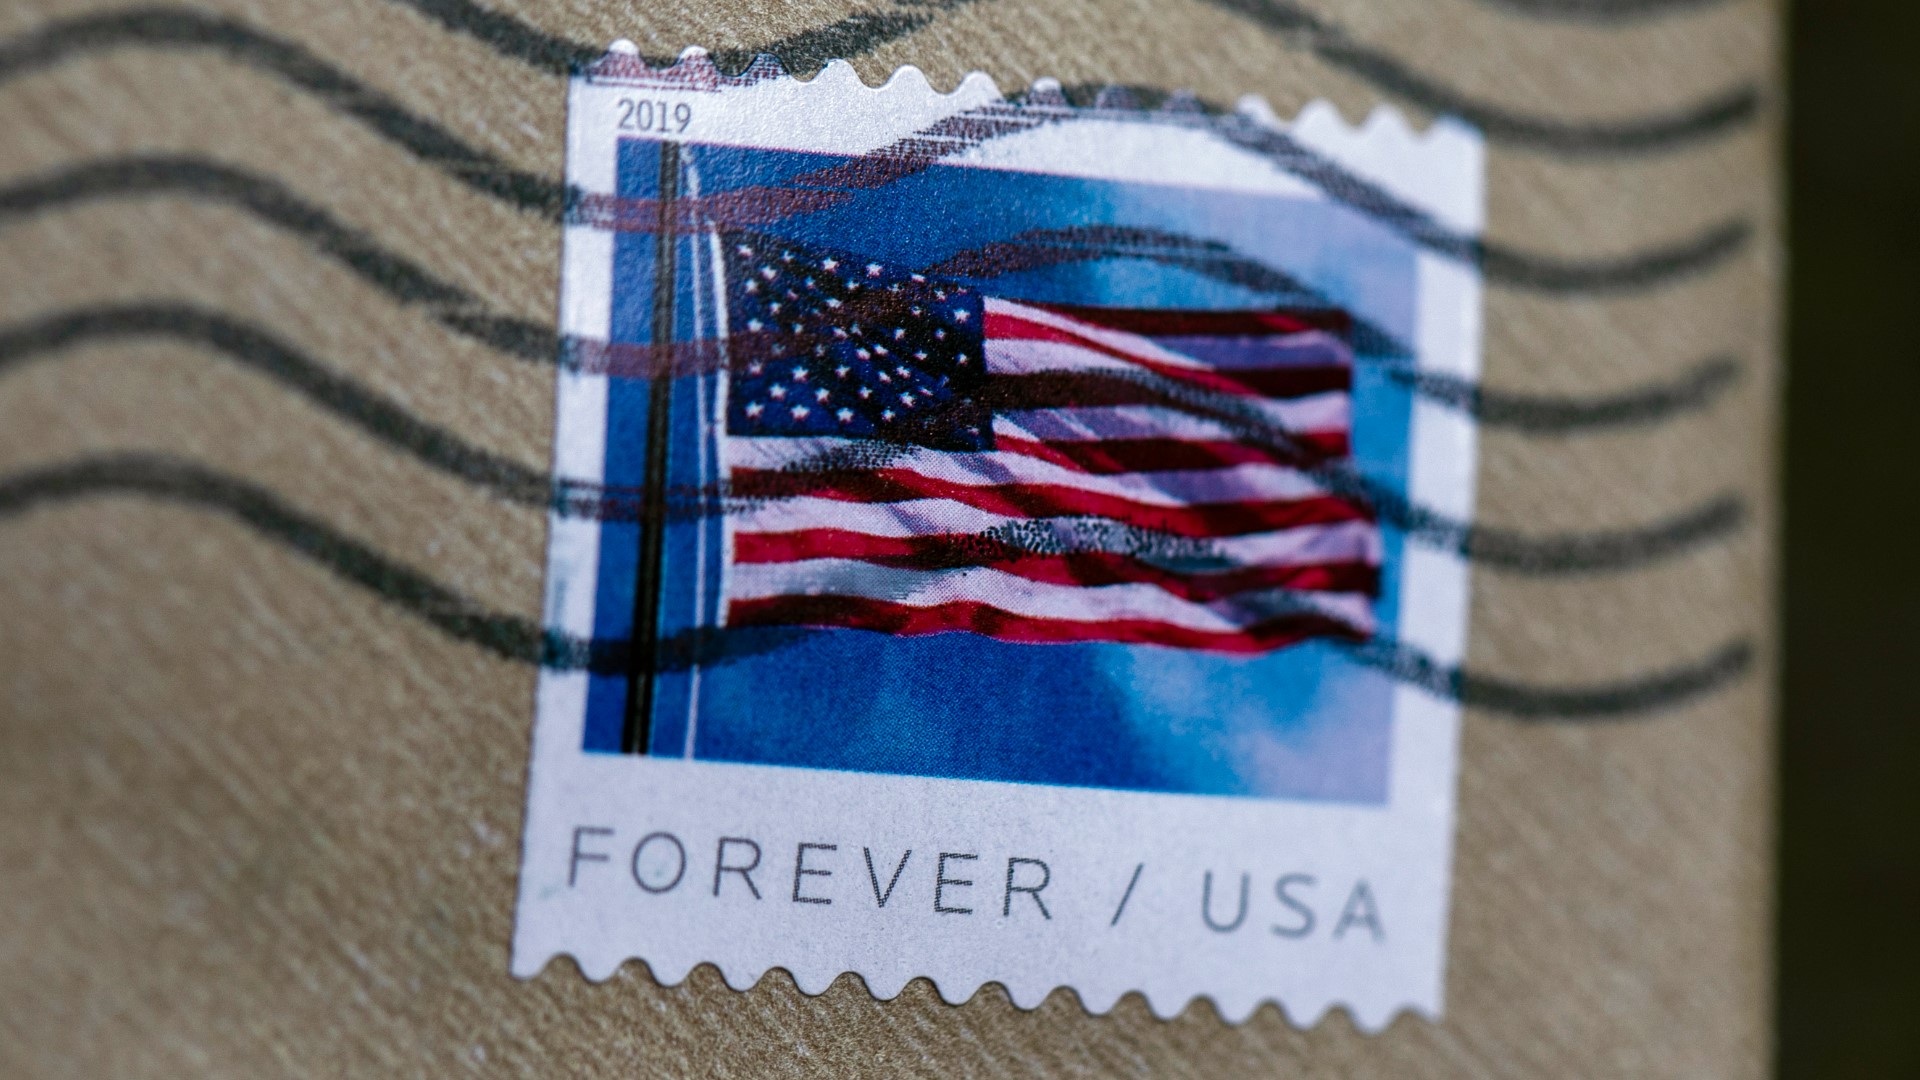 2024 How much is a forever stamp on knows 